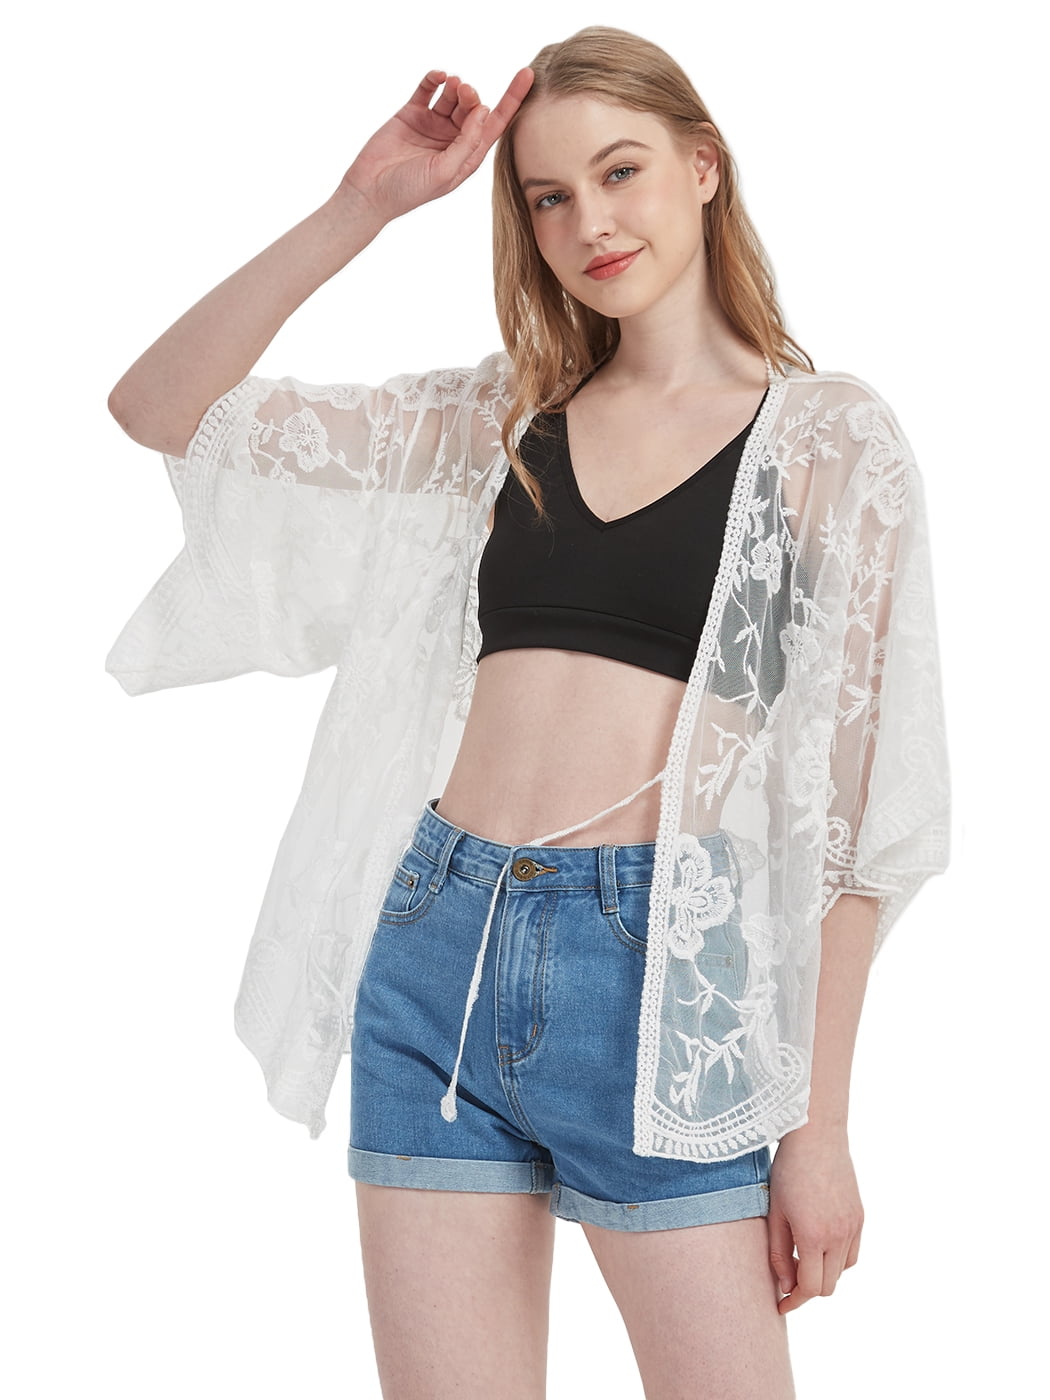 Womens Long Embroidered Lace Kimono Cardigan with Half Sleeves, White, One  Size - Walmart.com